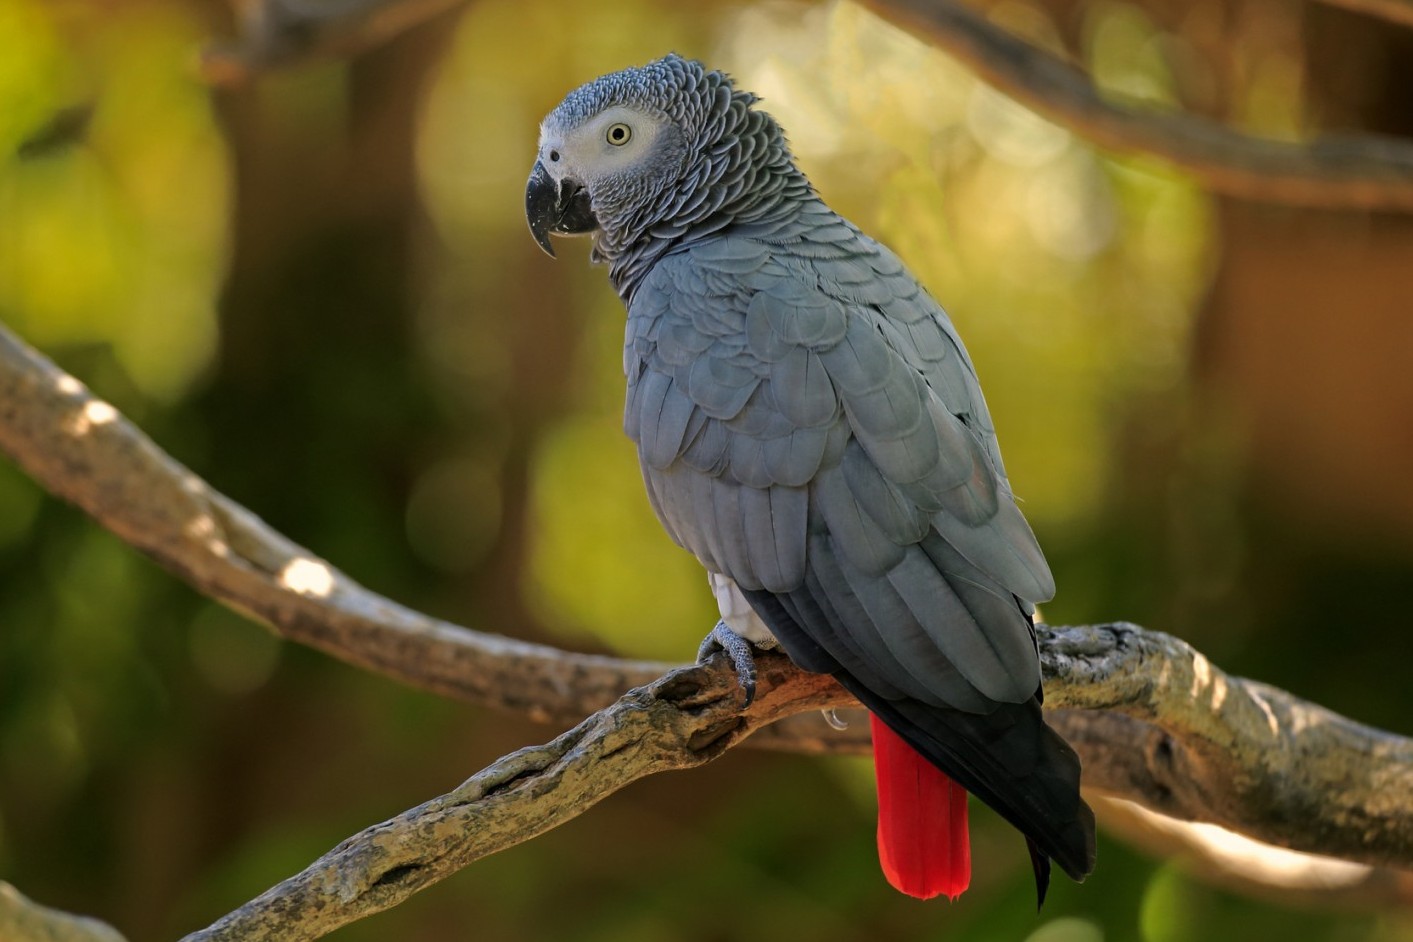 Pictured: An African Grey Parrot in the wild. Photo credit: Jurgen & Christine Sohns / Getty Images